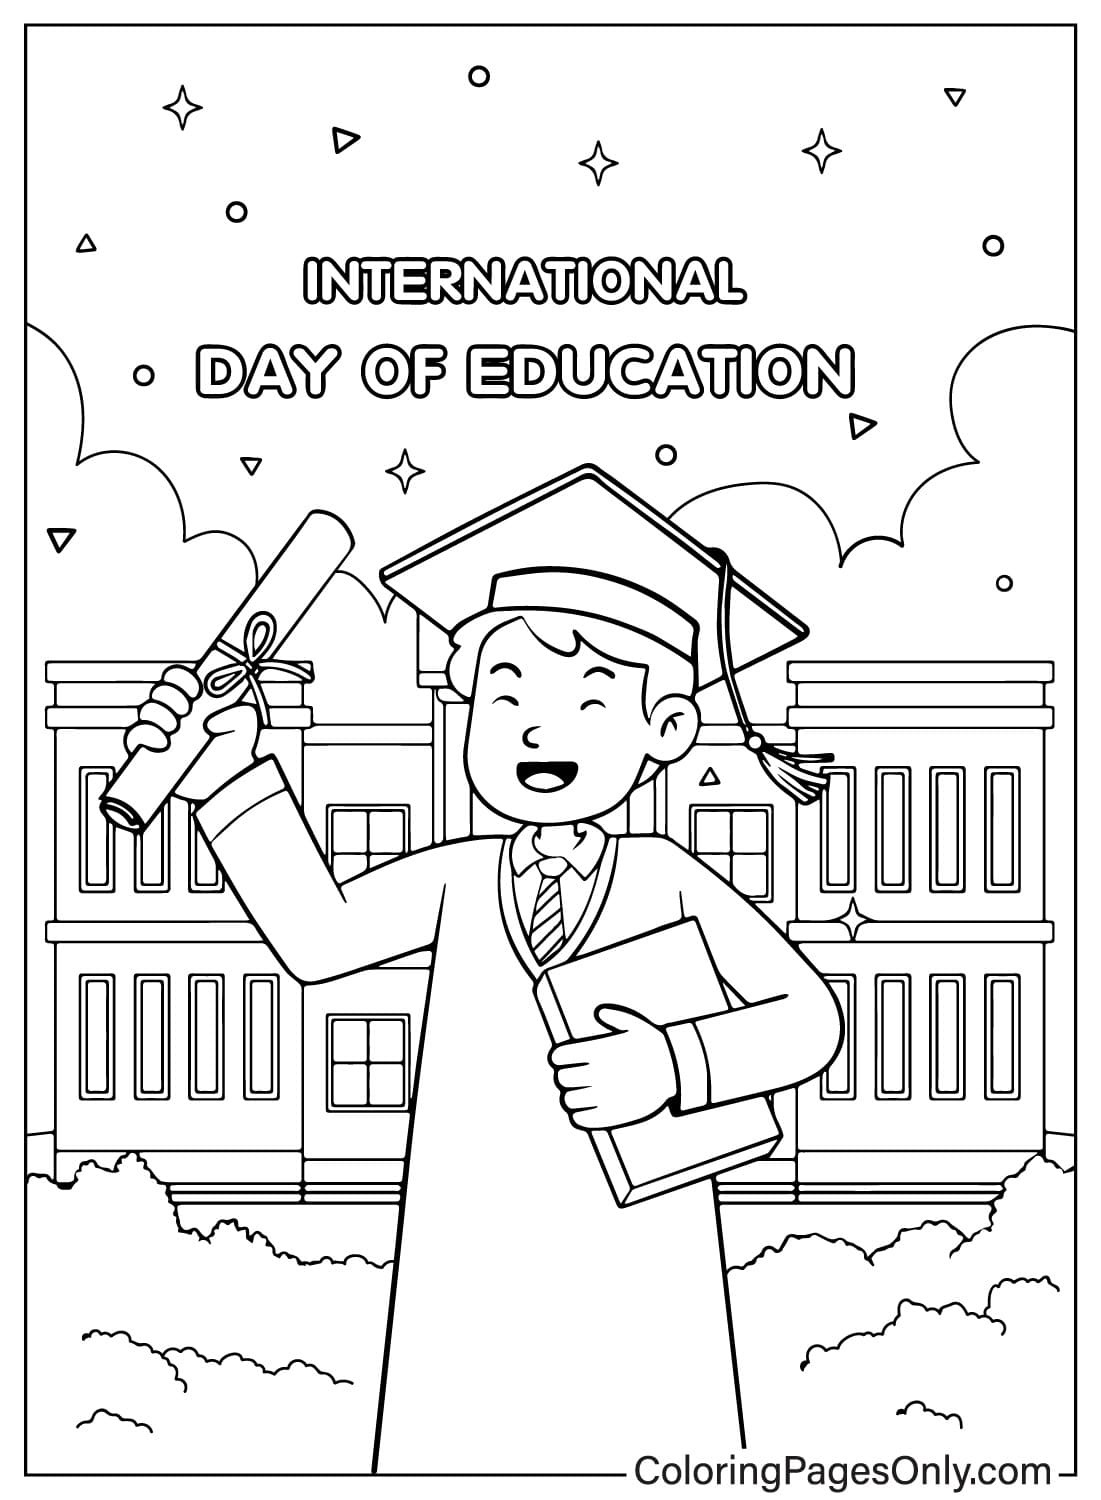 International Day of Education Drawing Coloring Page from International Day of Education